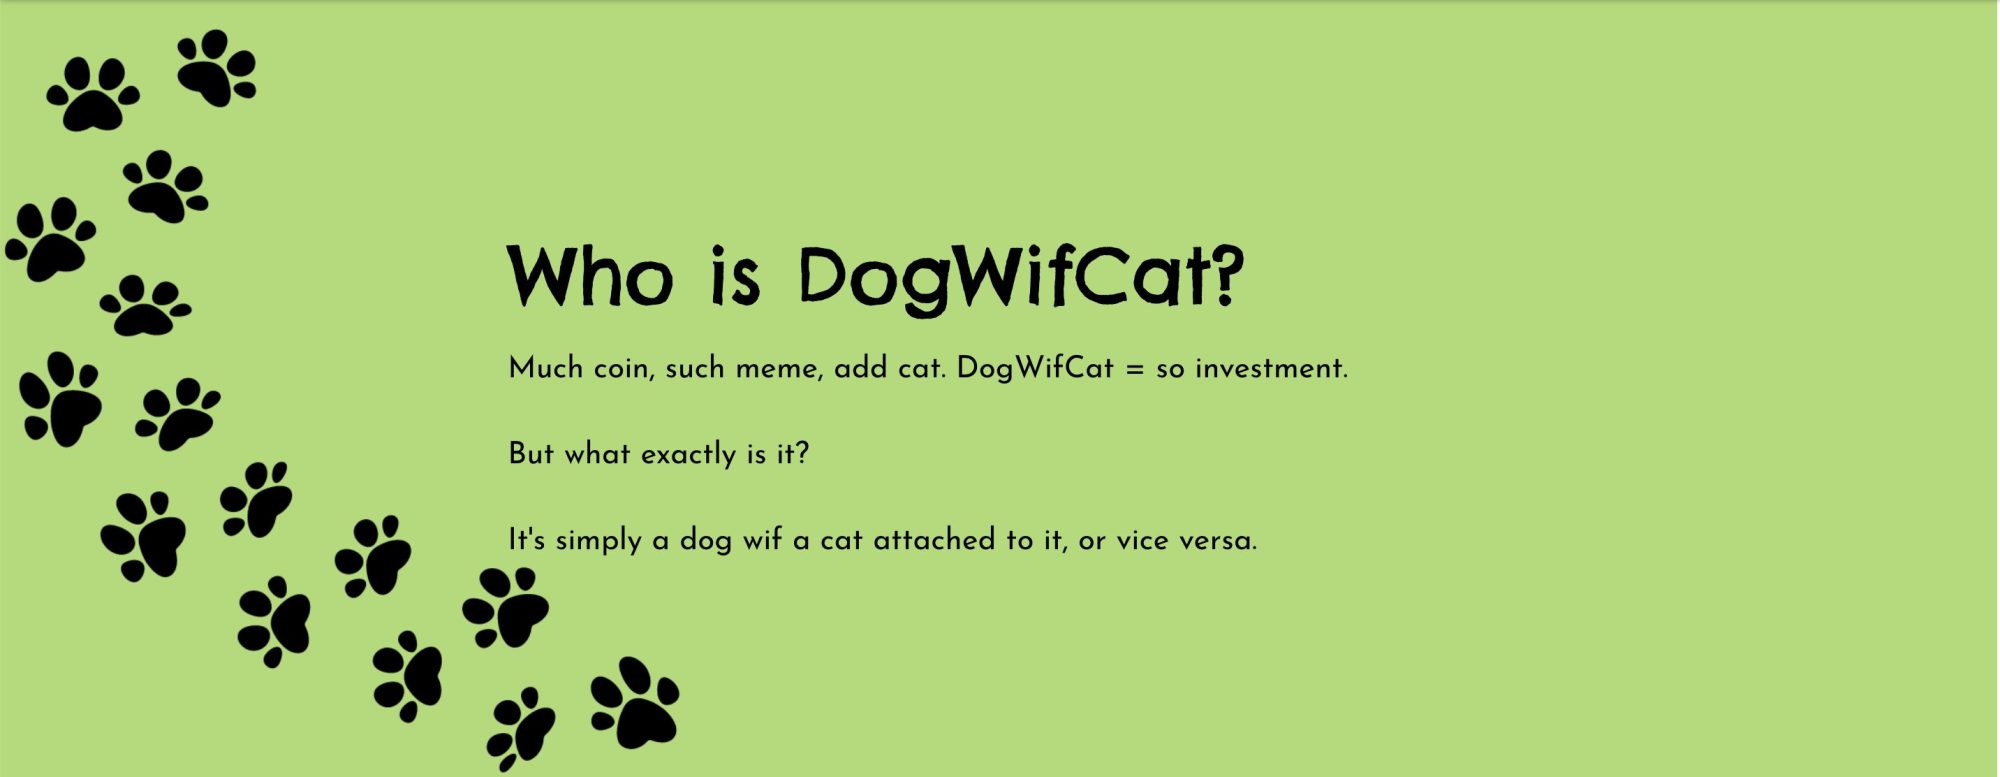 What is DogWifCat